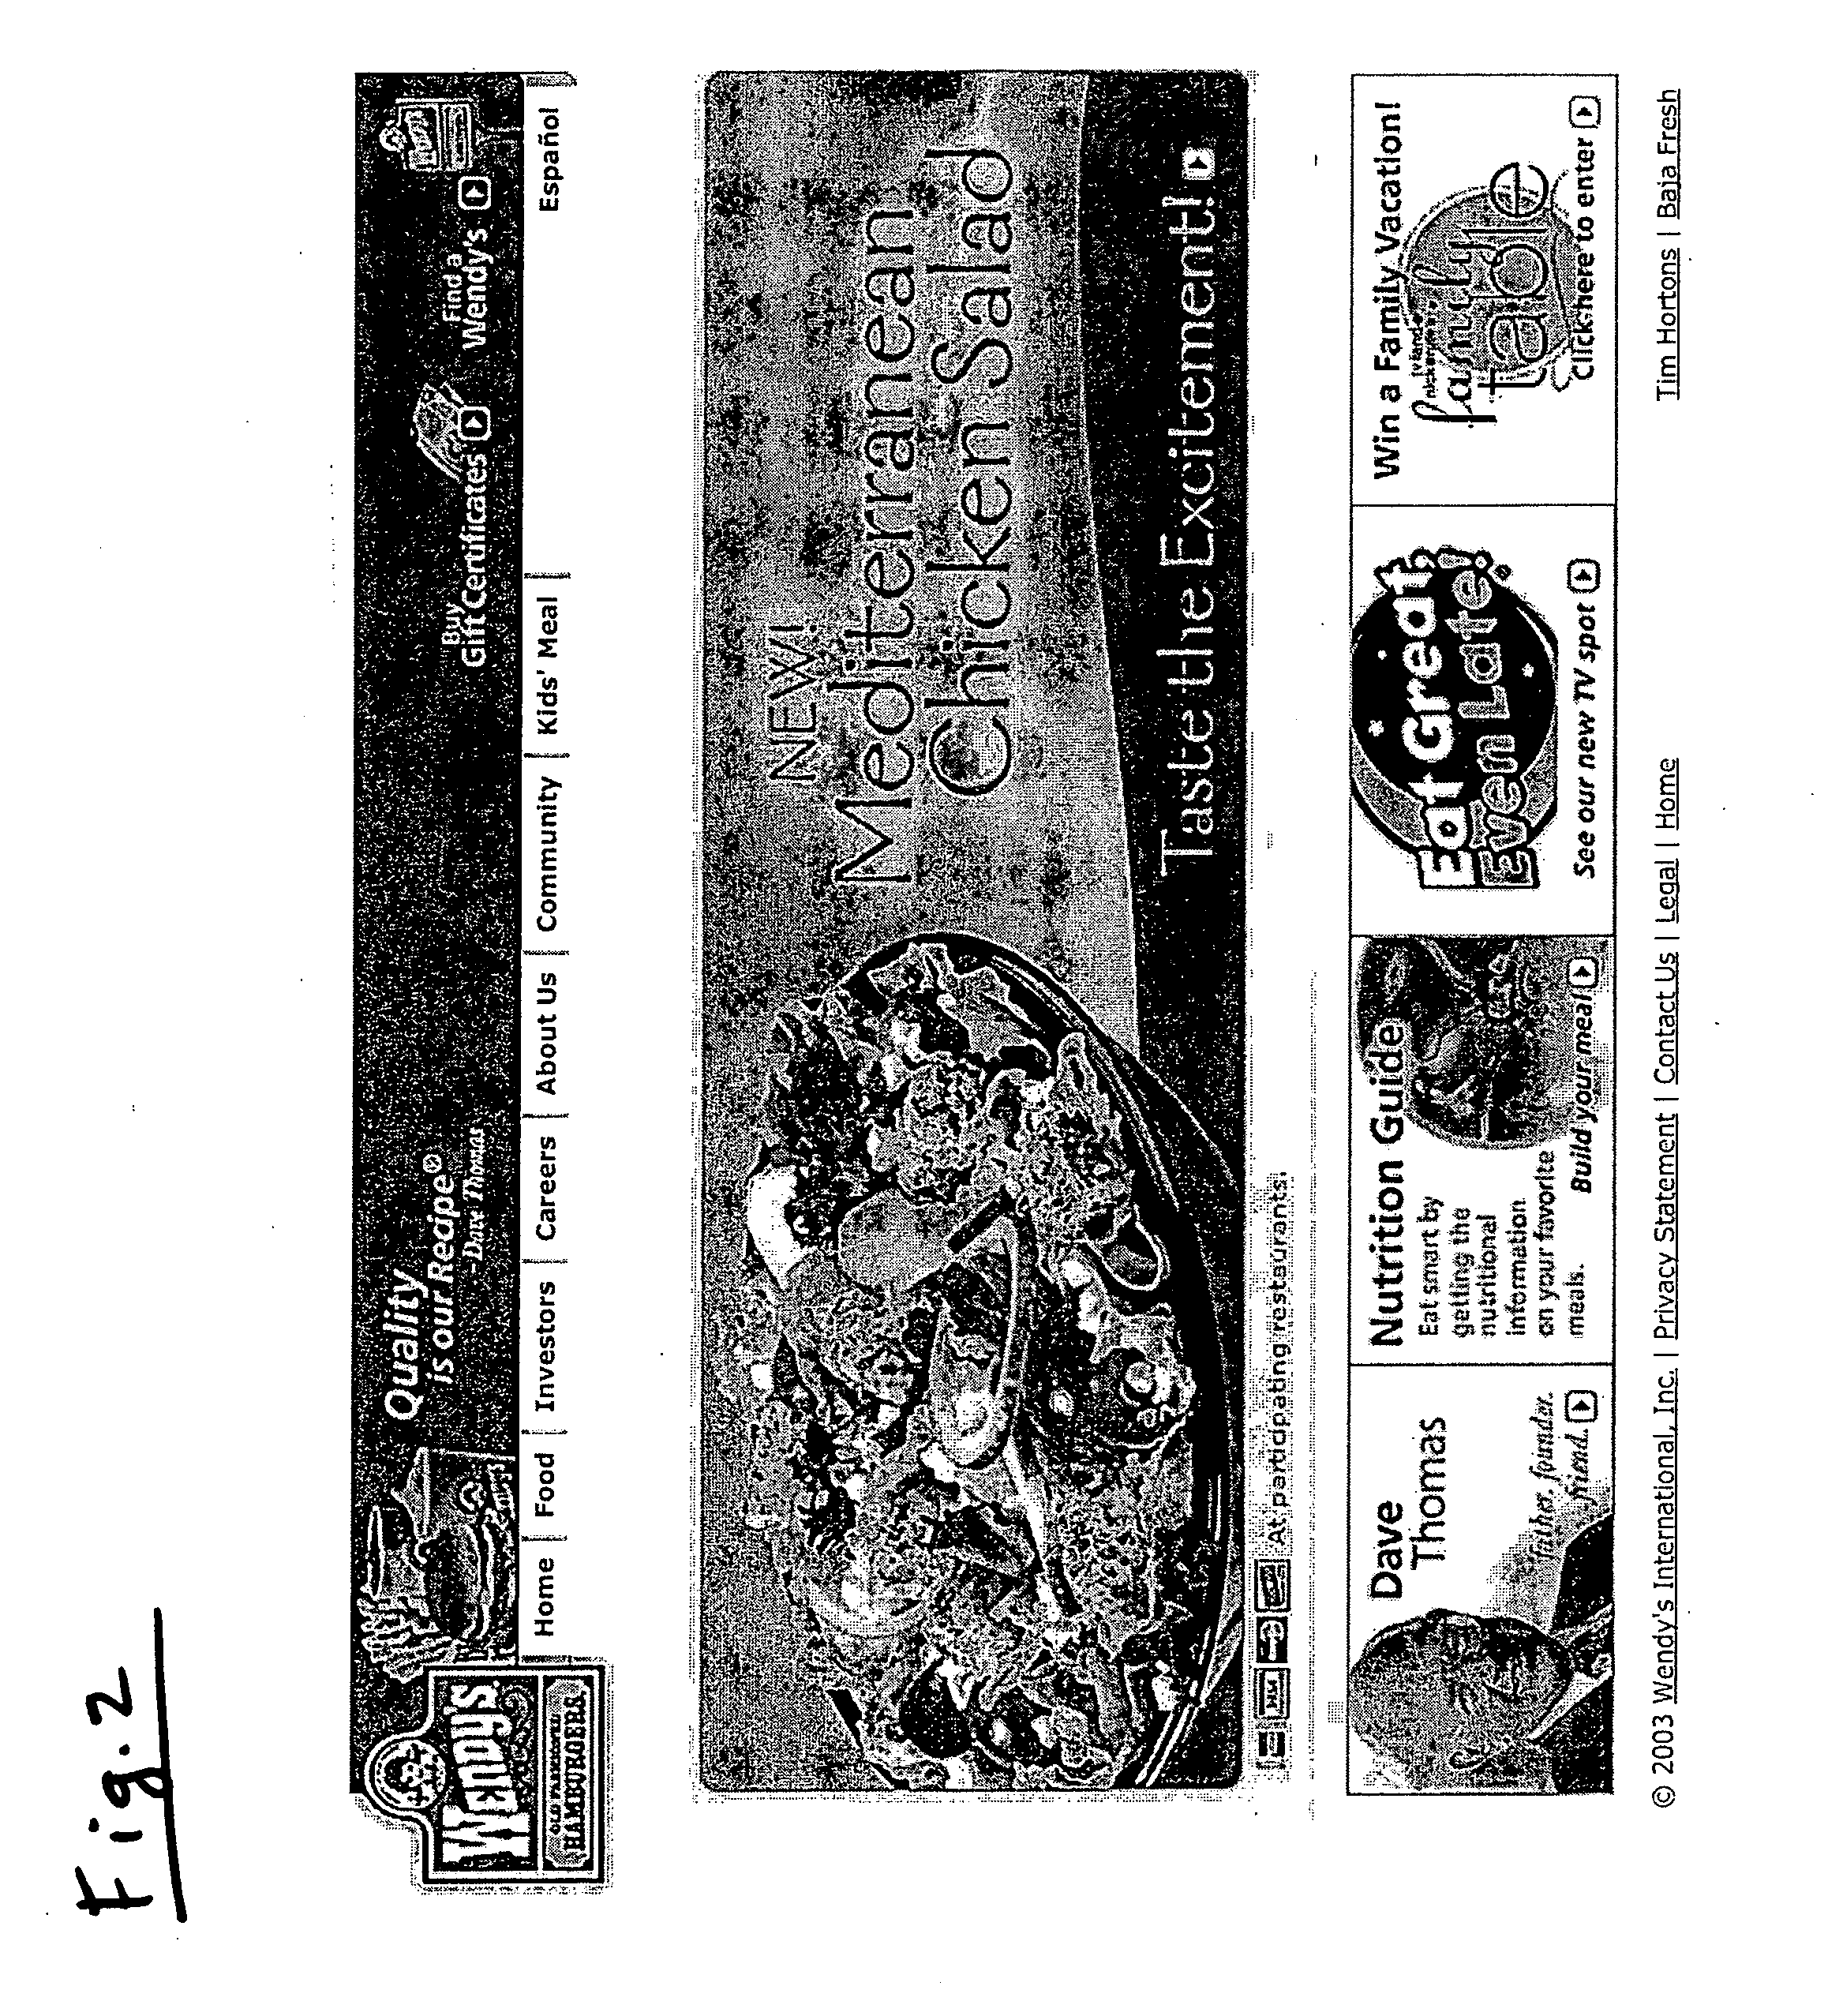 System and method for generating enhanced depiction of electronic files such as web files